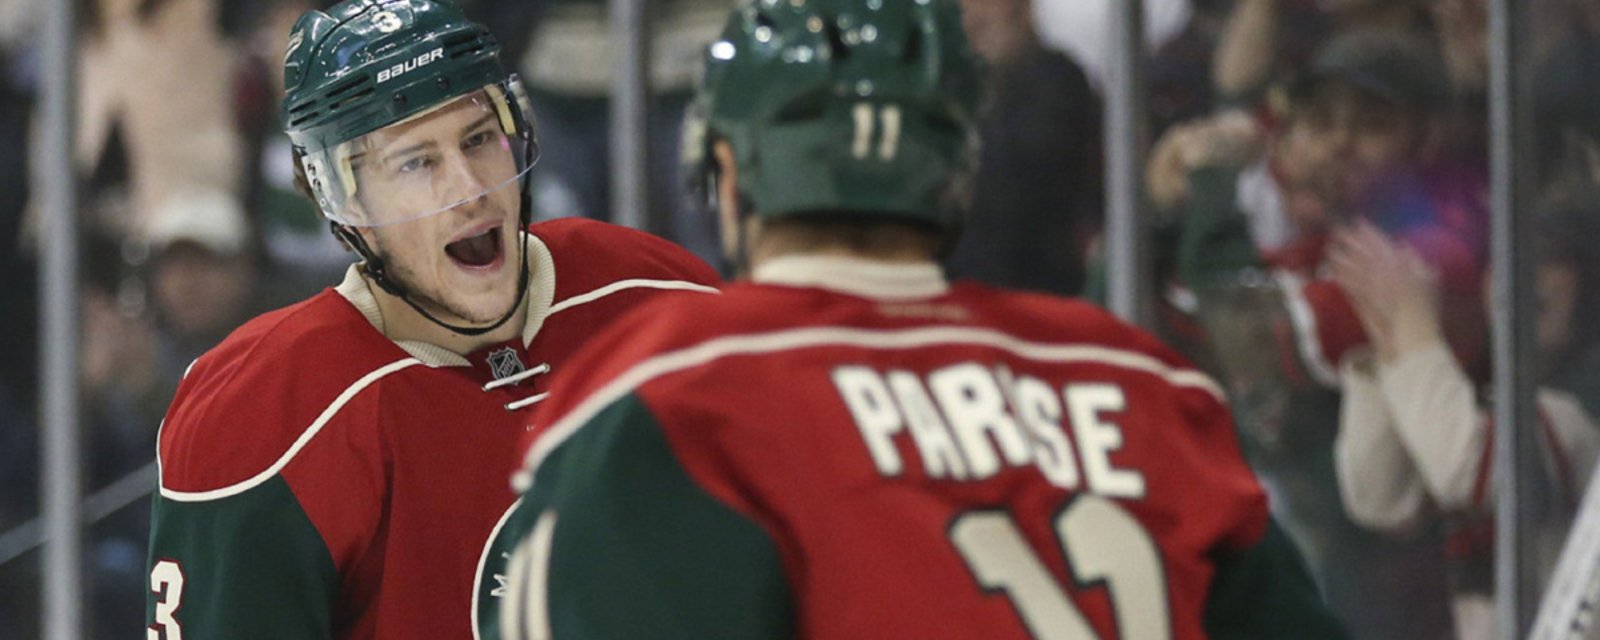 Injury Report: Finally some good news for the Wild